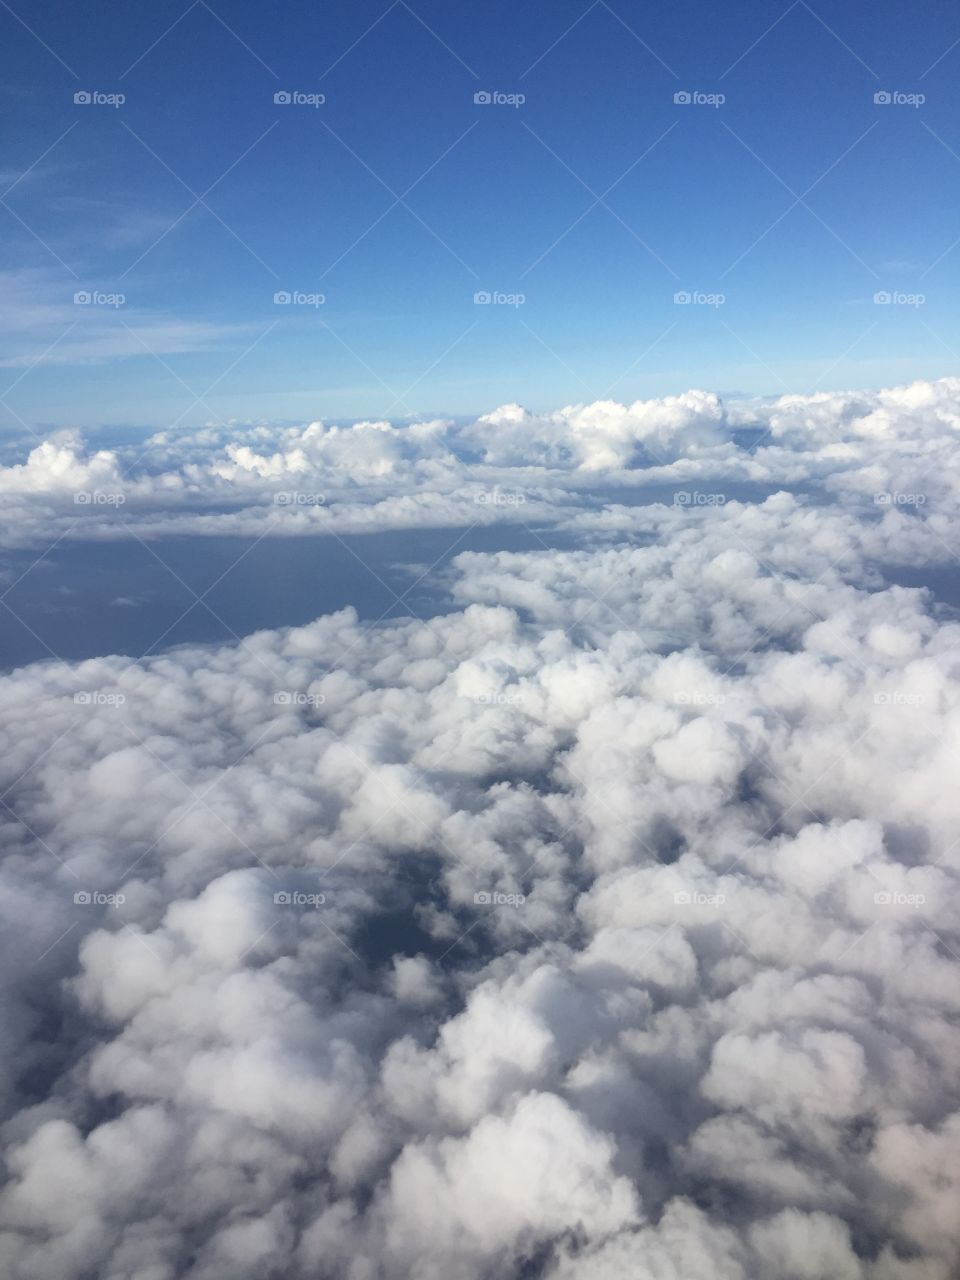 Photo of the sky white fluffy clouds and dark blue ocean below, taken from an airplane.